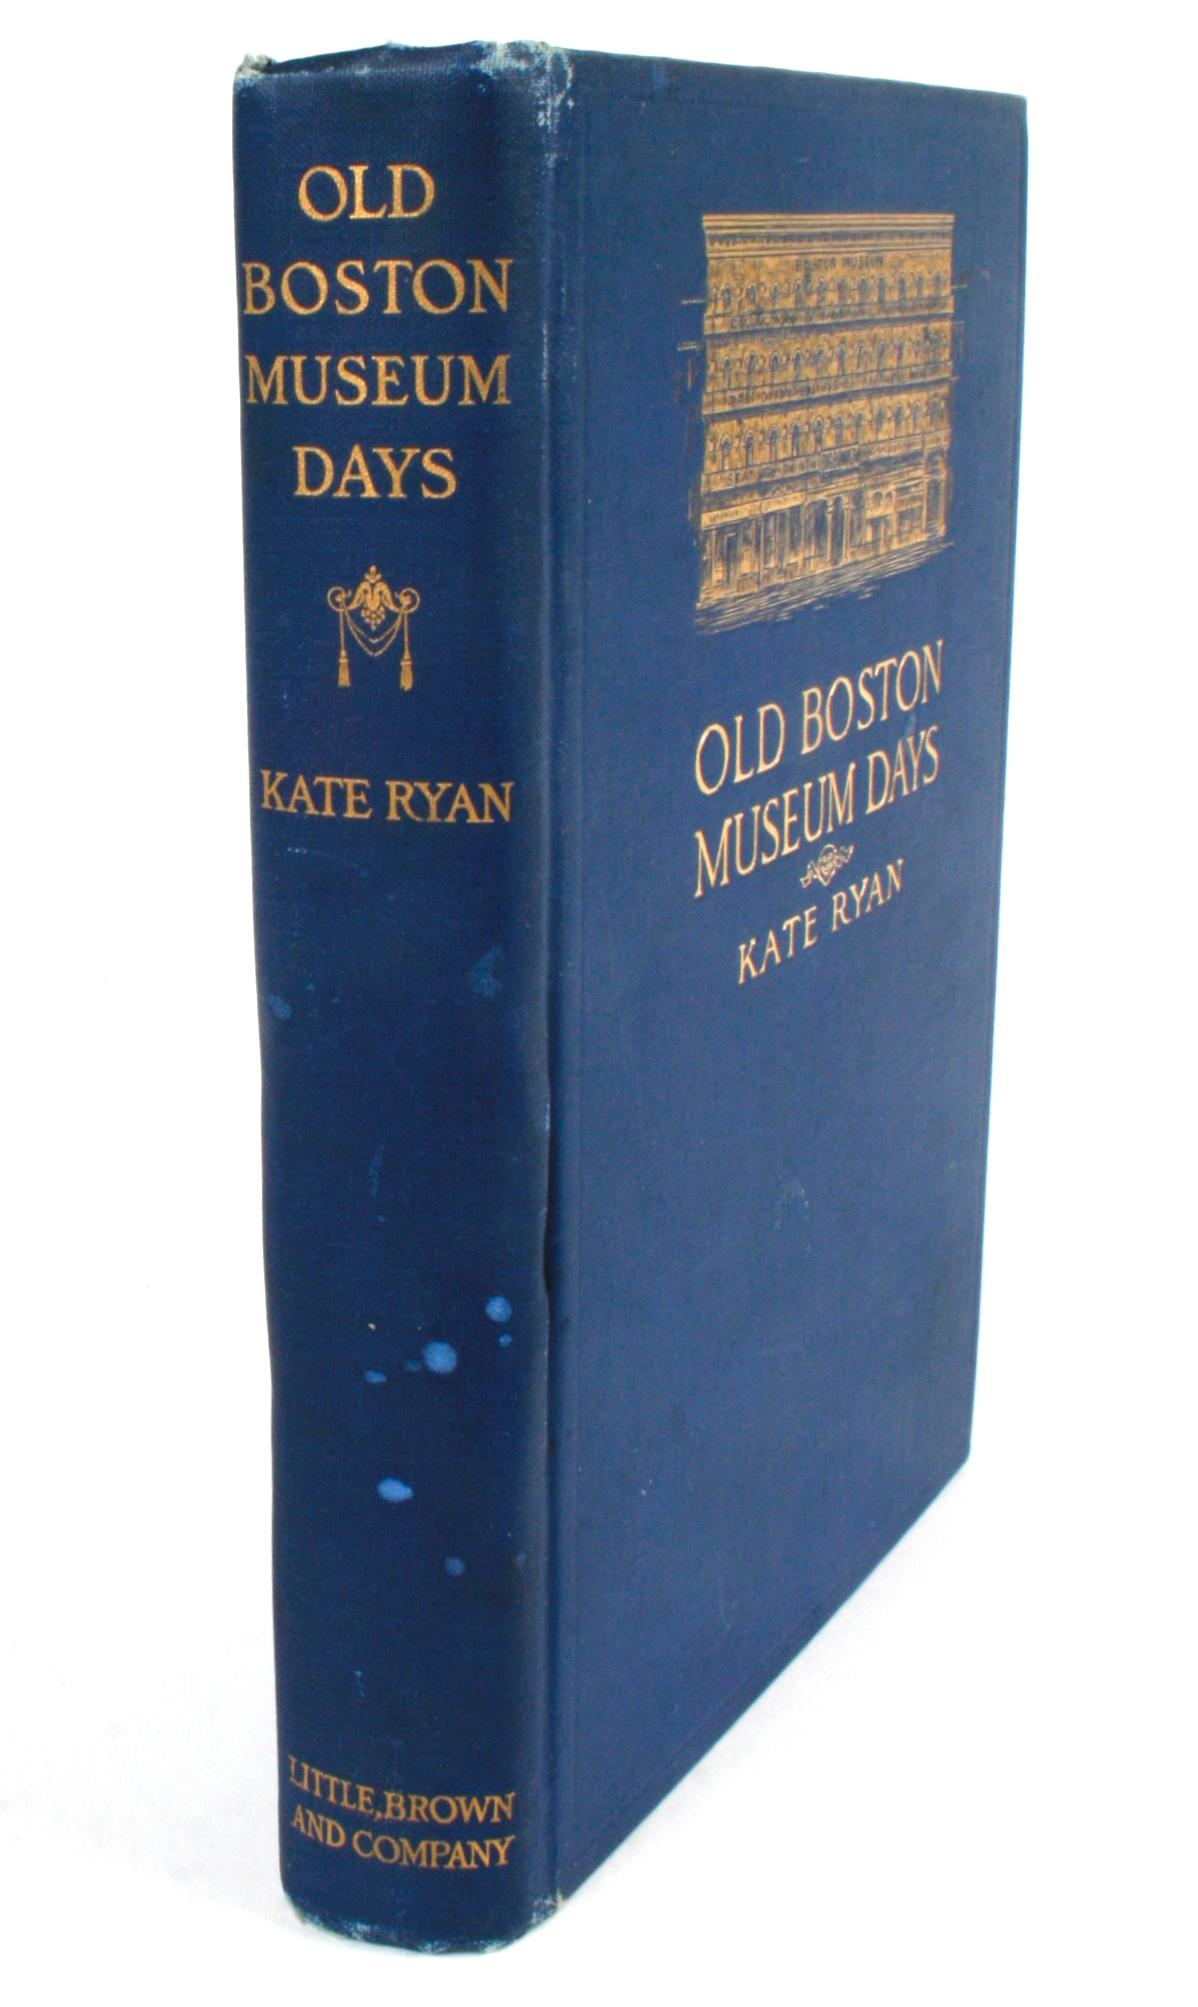 Old Boston Museum Days by Kate Ryan. Boston: Little, Brown, and Company, 1915. First edition hardcover with no dust jacket. 264 pp. Antique history book about the Old Boston Museum written by the Edwardian actress Kate Ryan. The Boston Museum was a